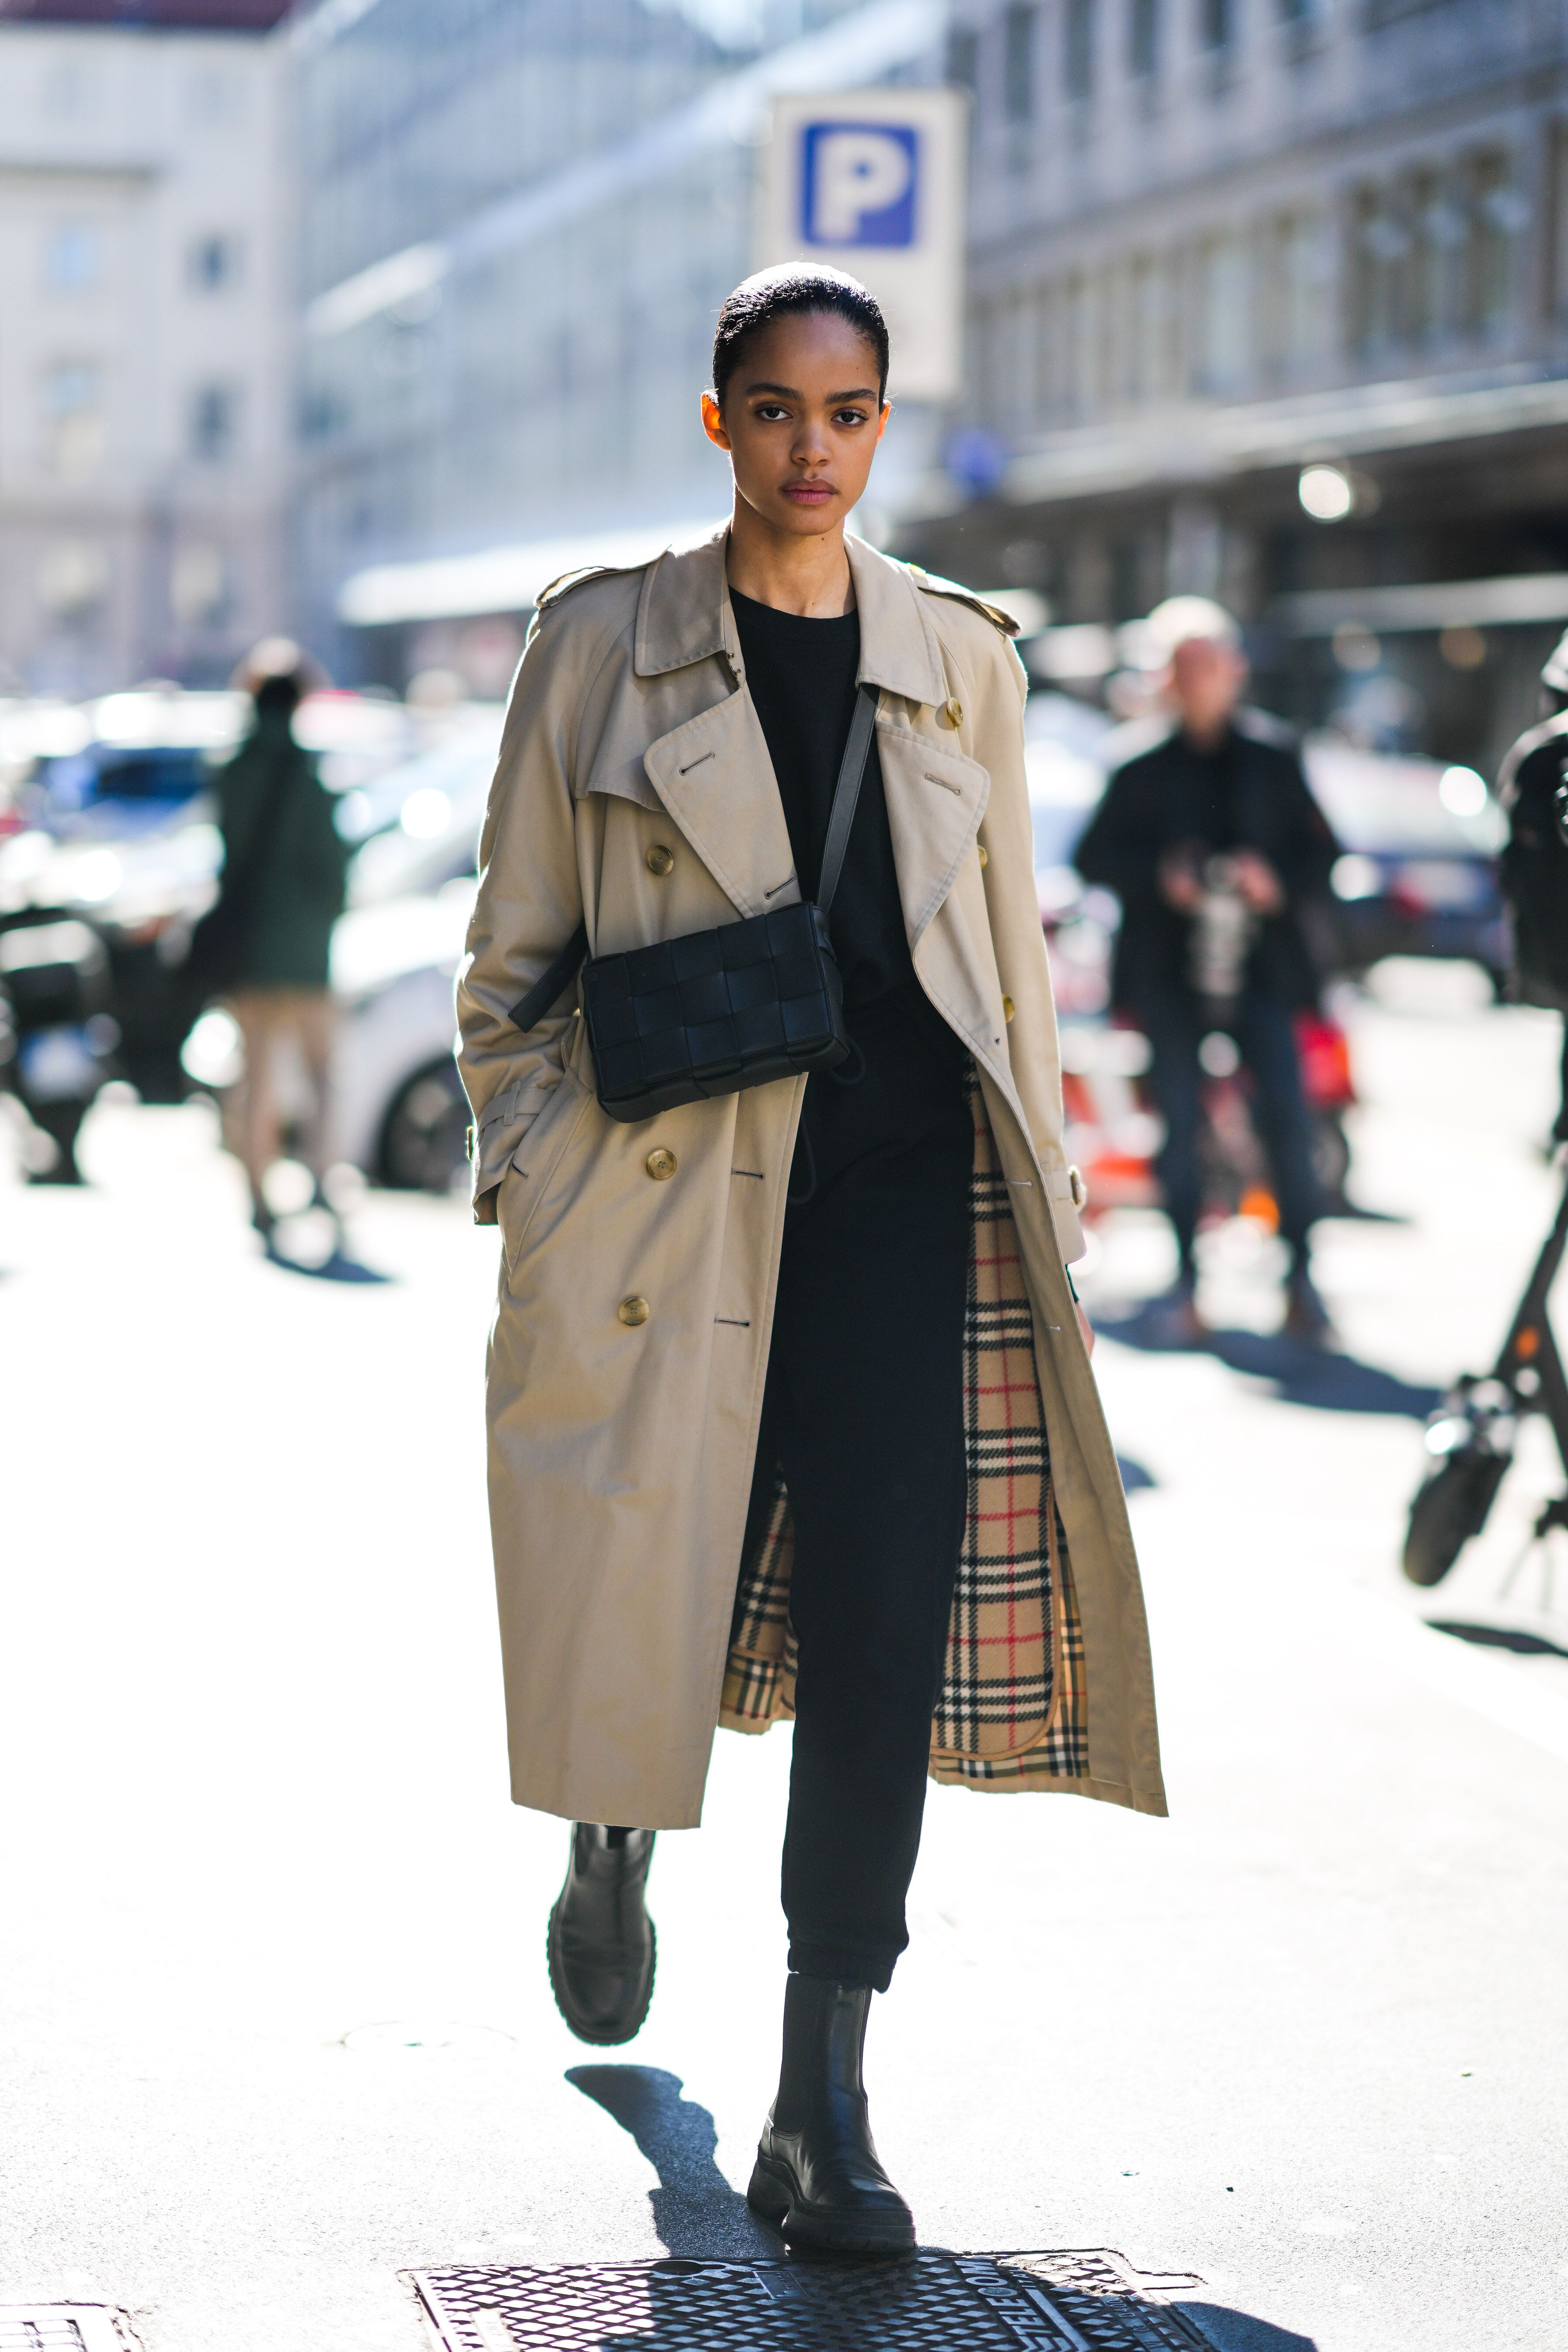 Where to buy a trench, look at its history